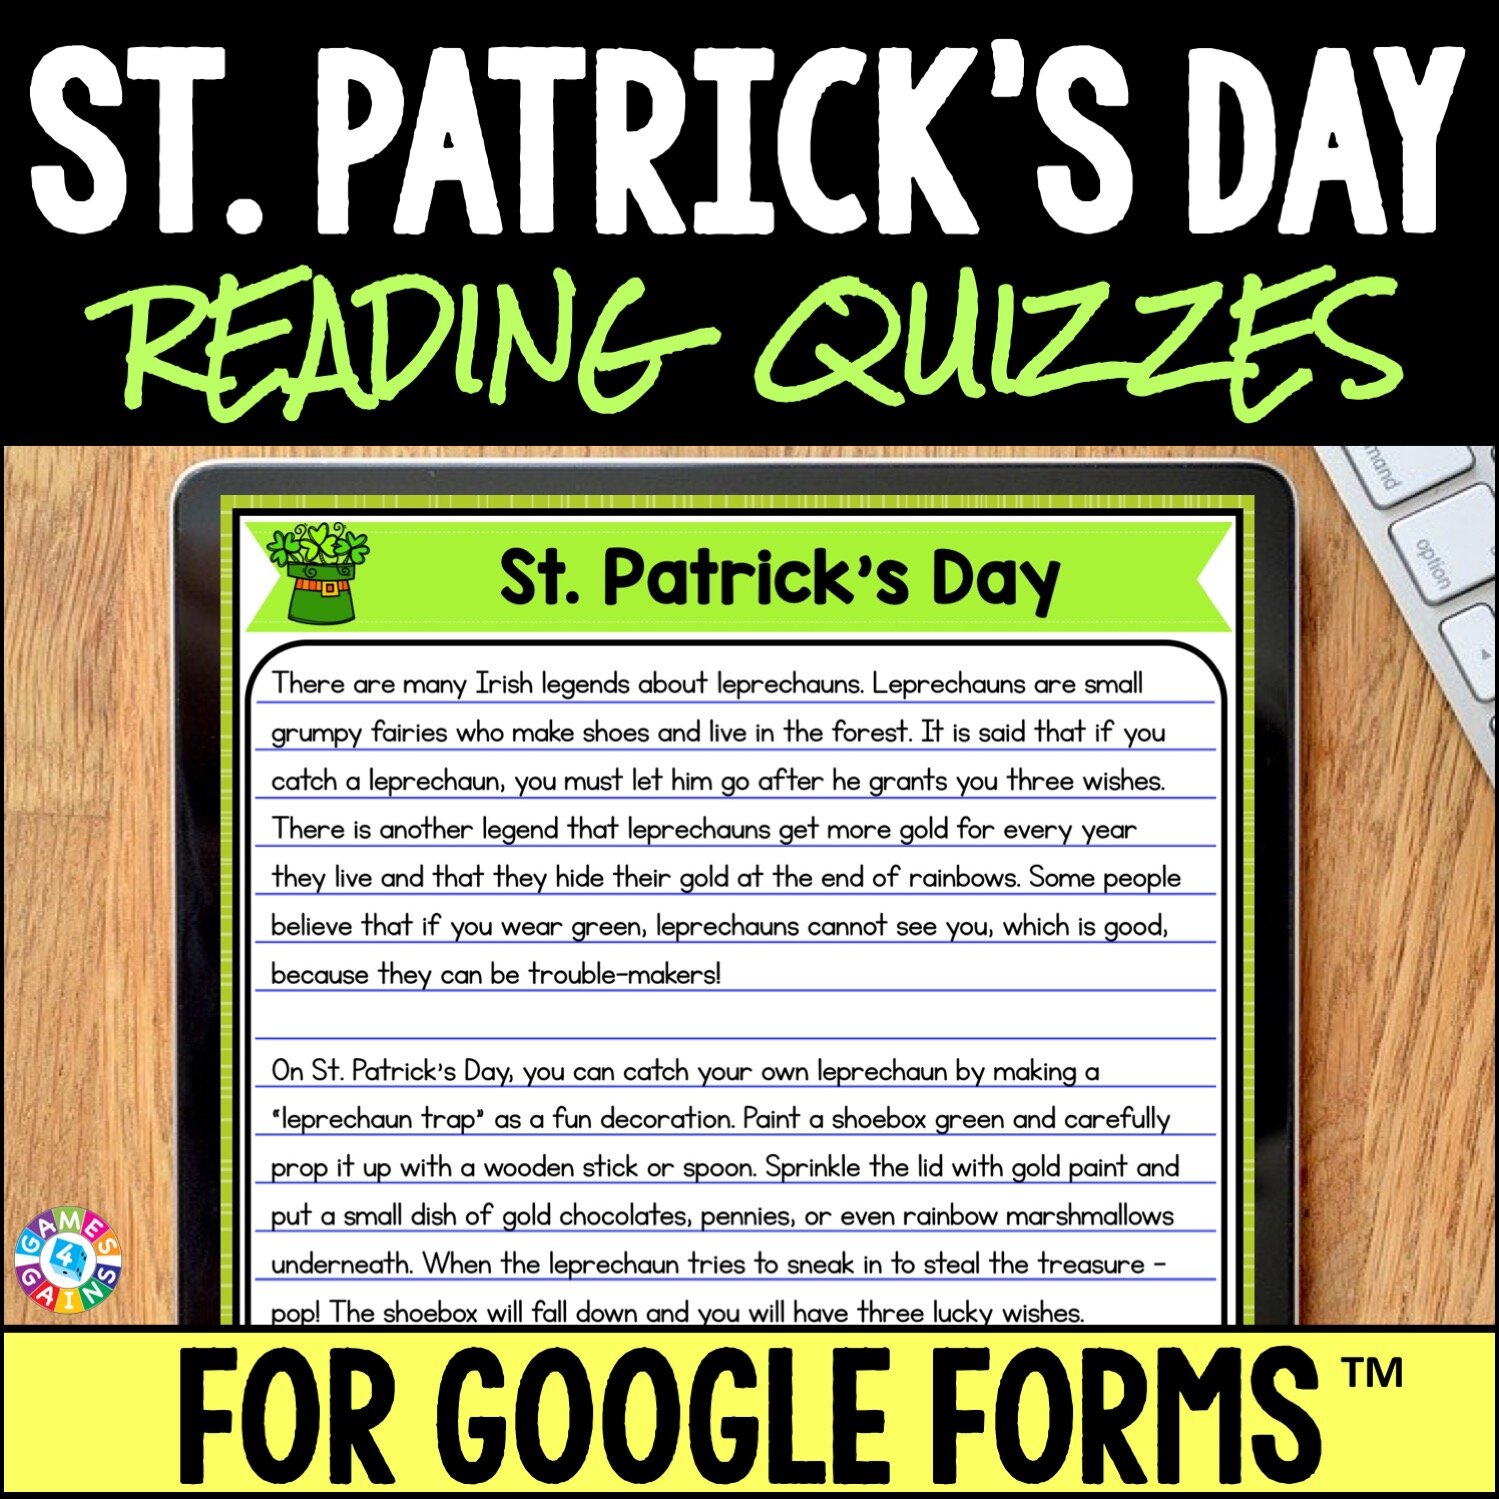 St. Patrick's Day Reading Quiz Google Forms Cover.jpg